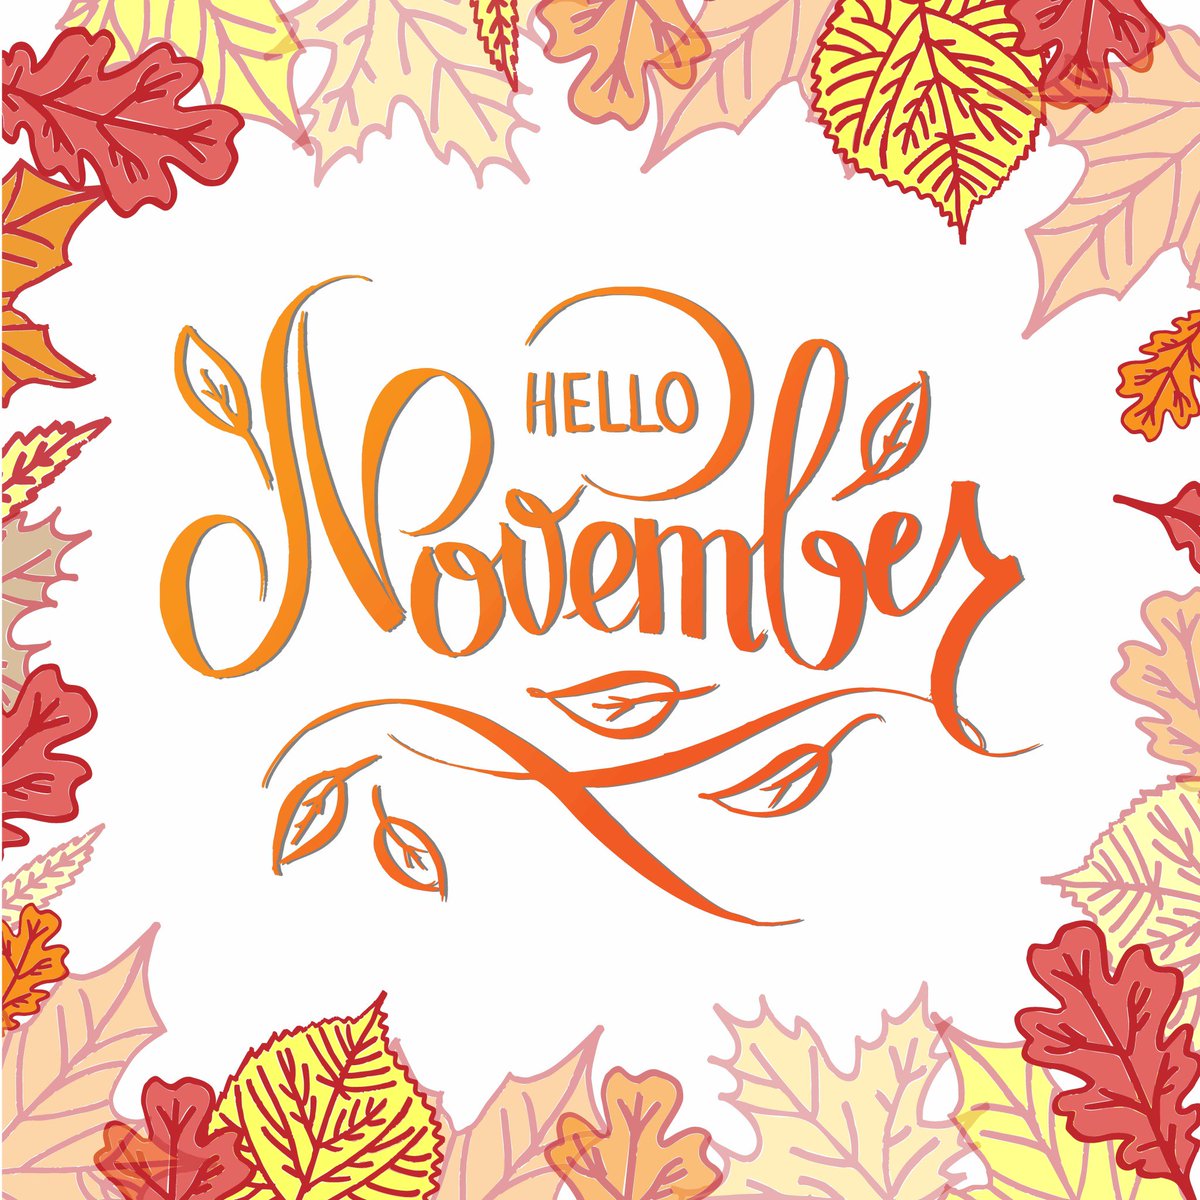 Happy November from us all in Provence! 

#november #novemberinprovence #provence #autumnholidays #olivesandvines